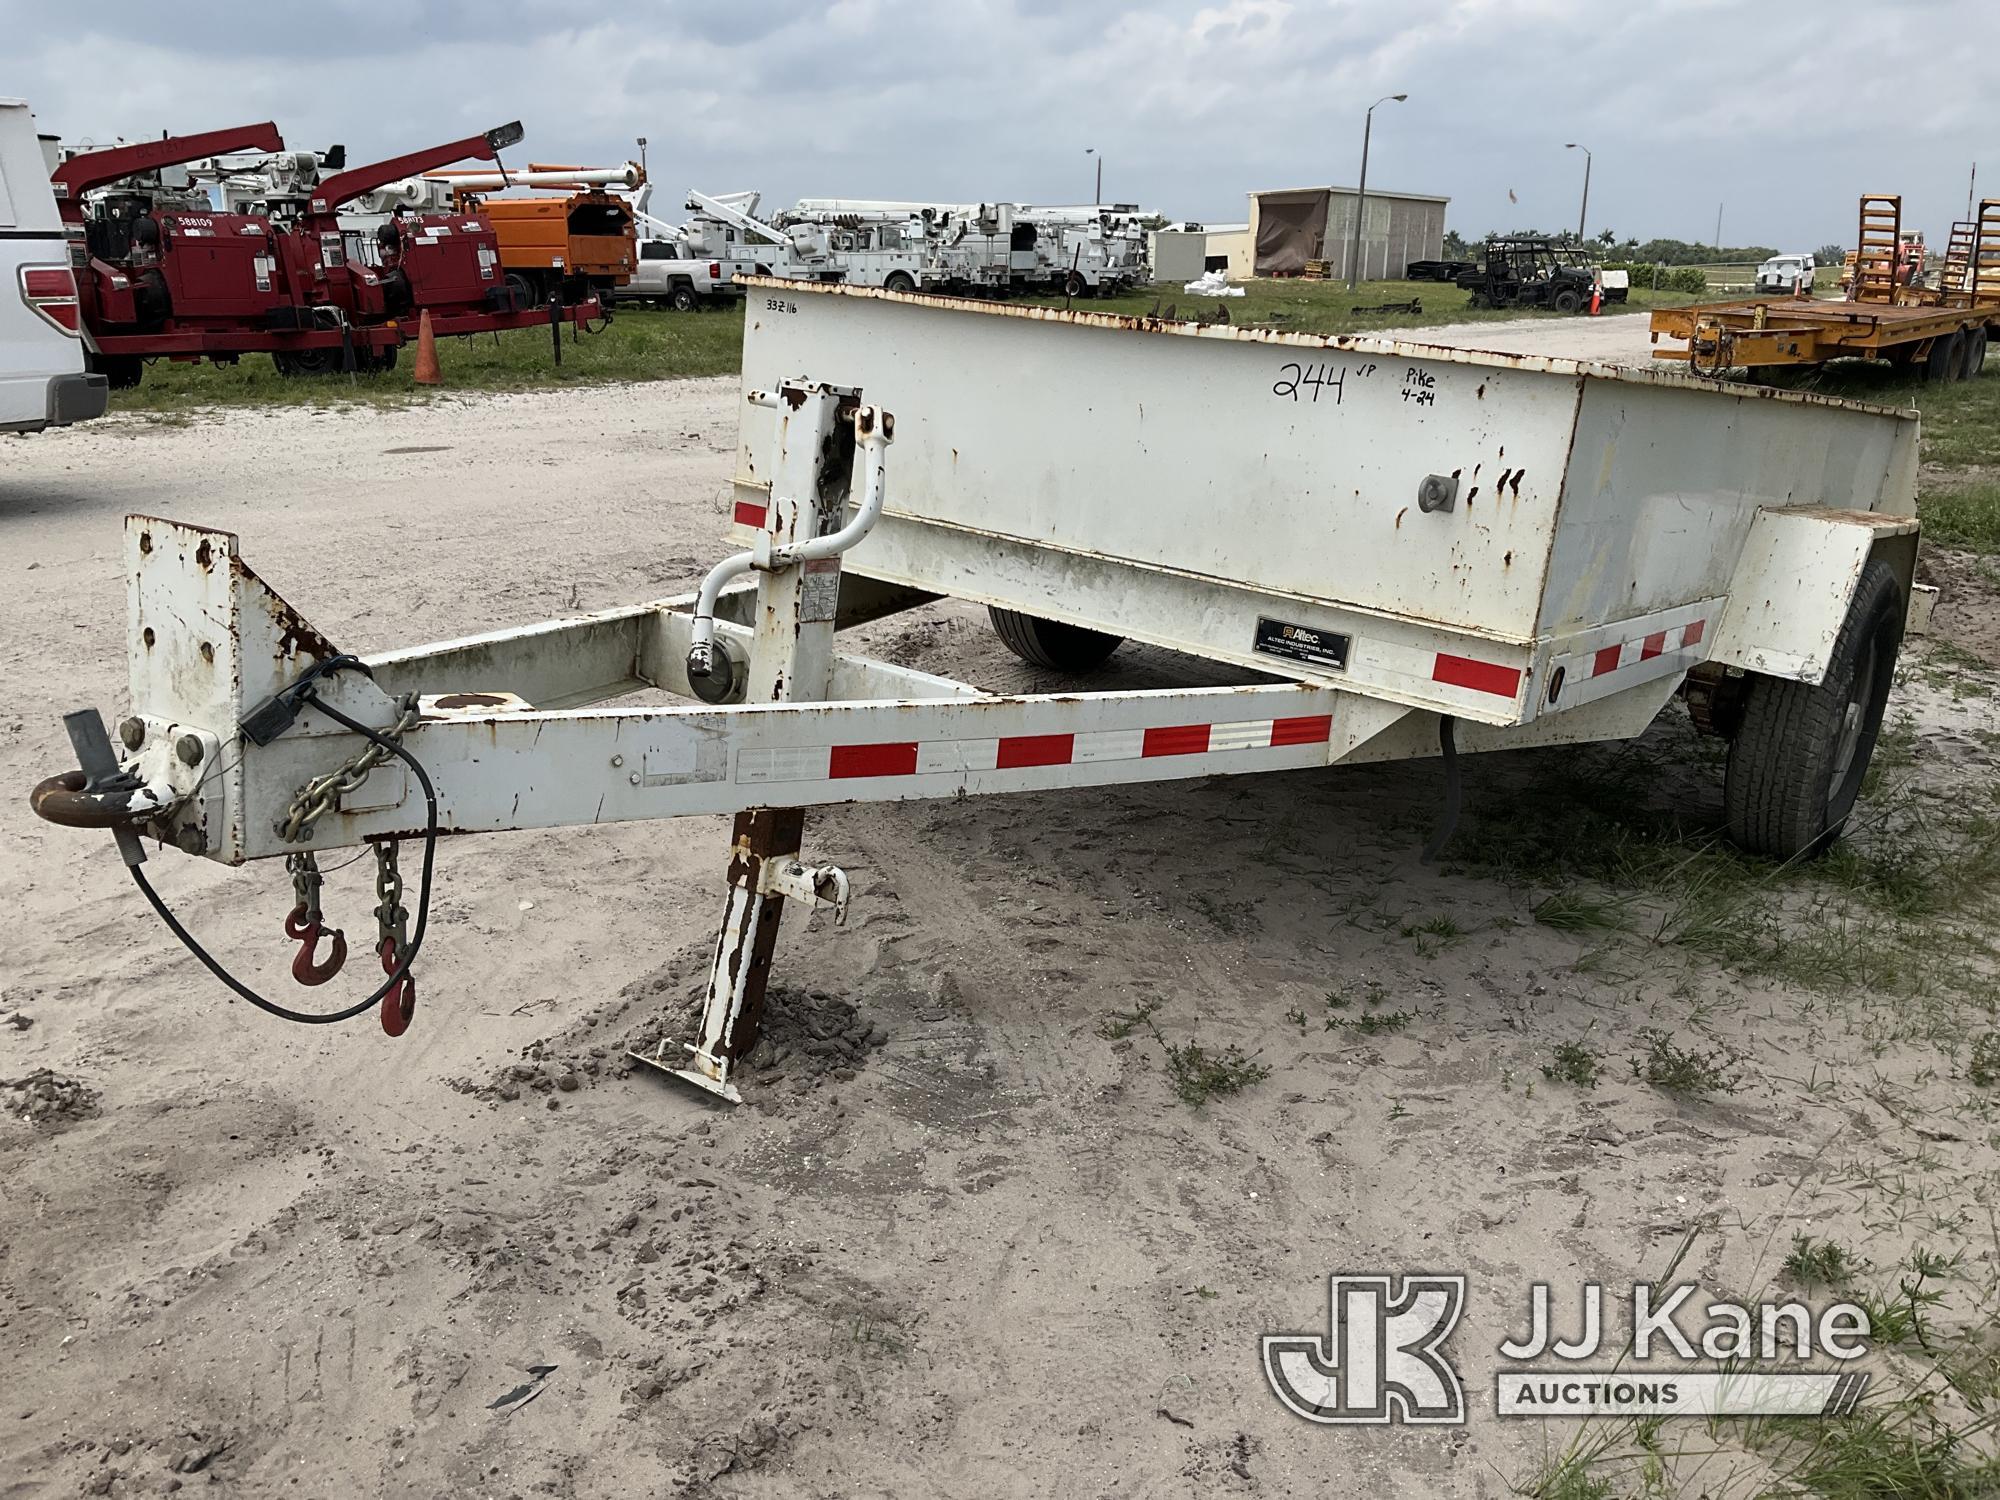 (Westlake, FL) 2016 Altec S/A Material Trailer Towable, Body Damage & Rust) (FL Residents Purchasing